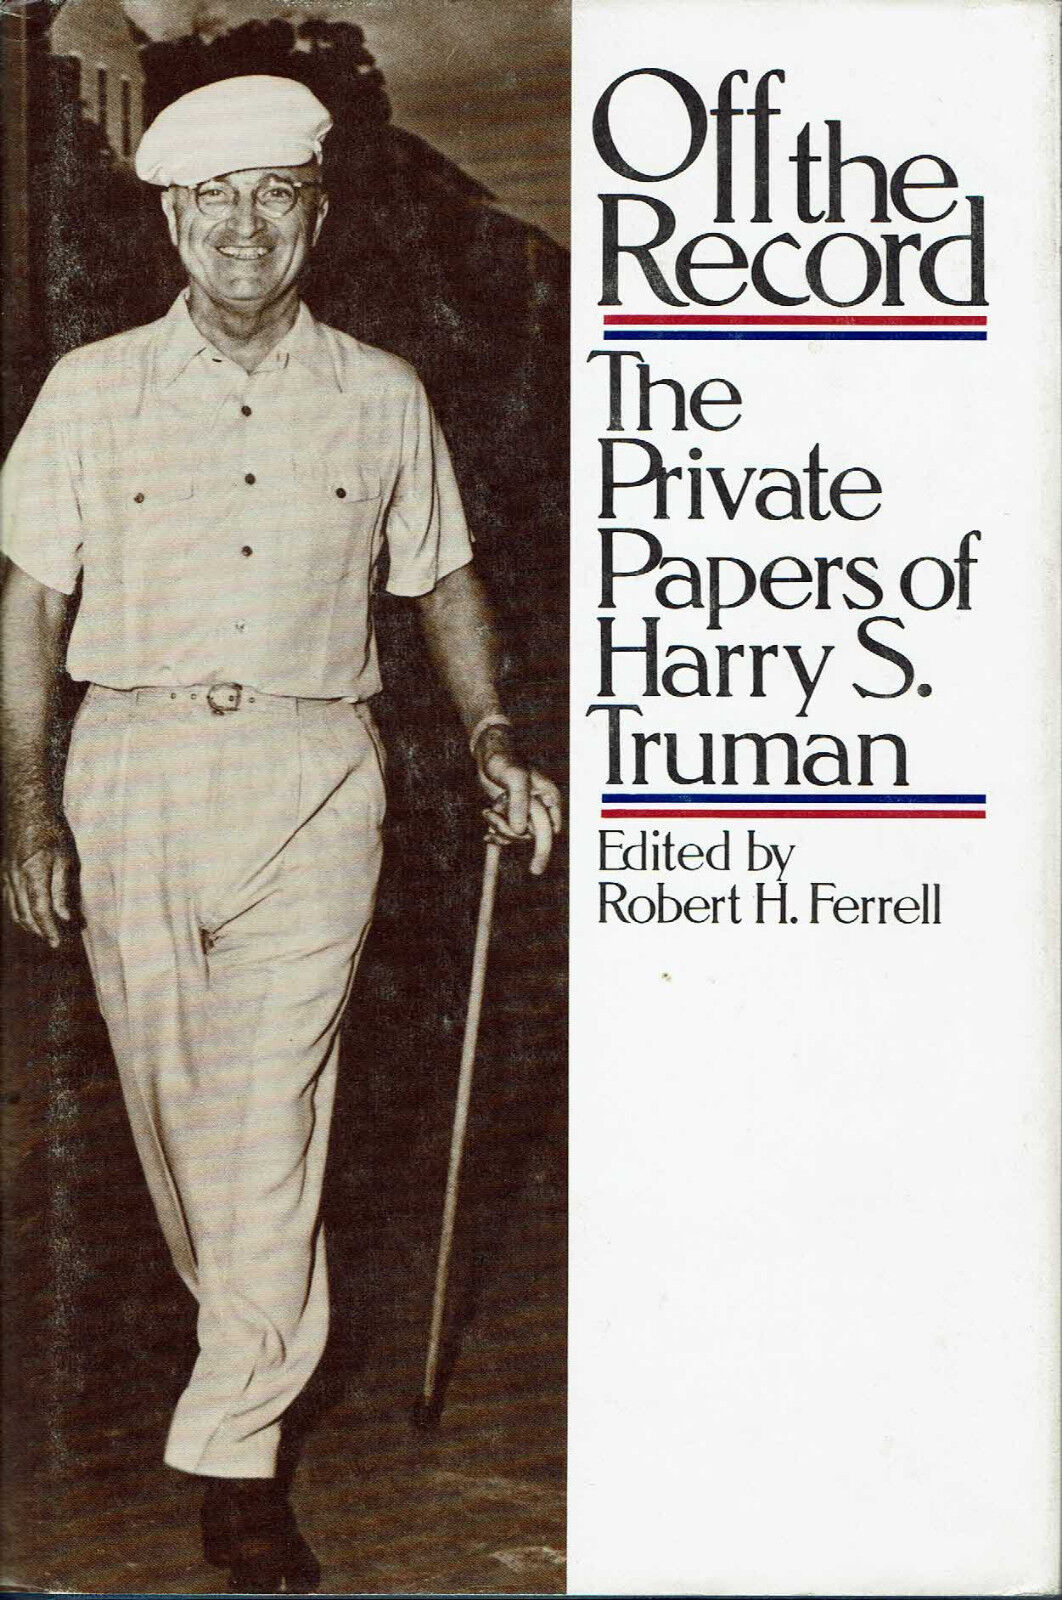 Off the Record: the Private Papers of Harry S. Truman - Ferrell, Robert H. (Editor)